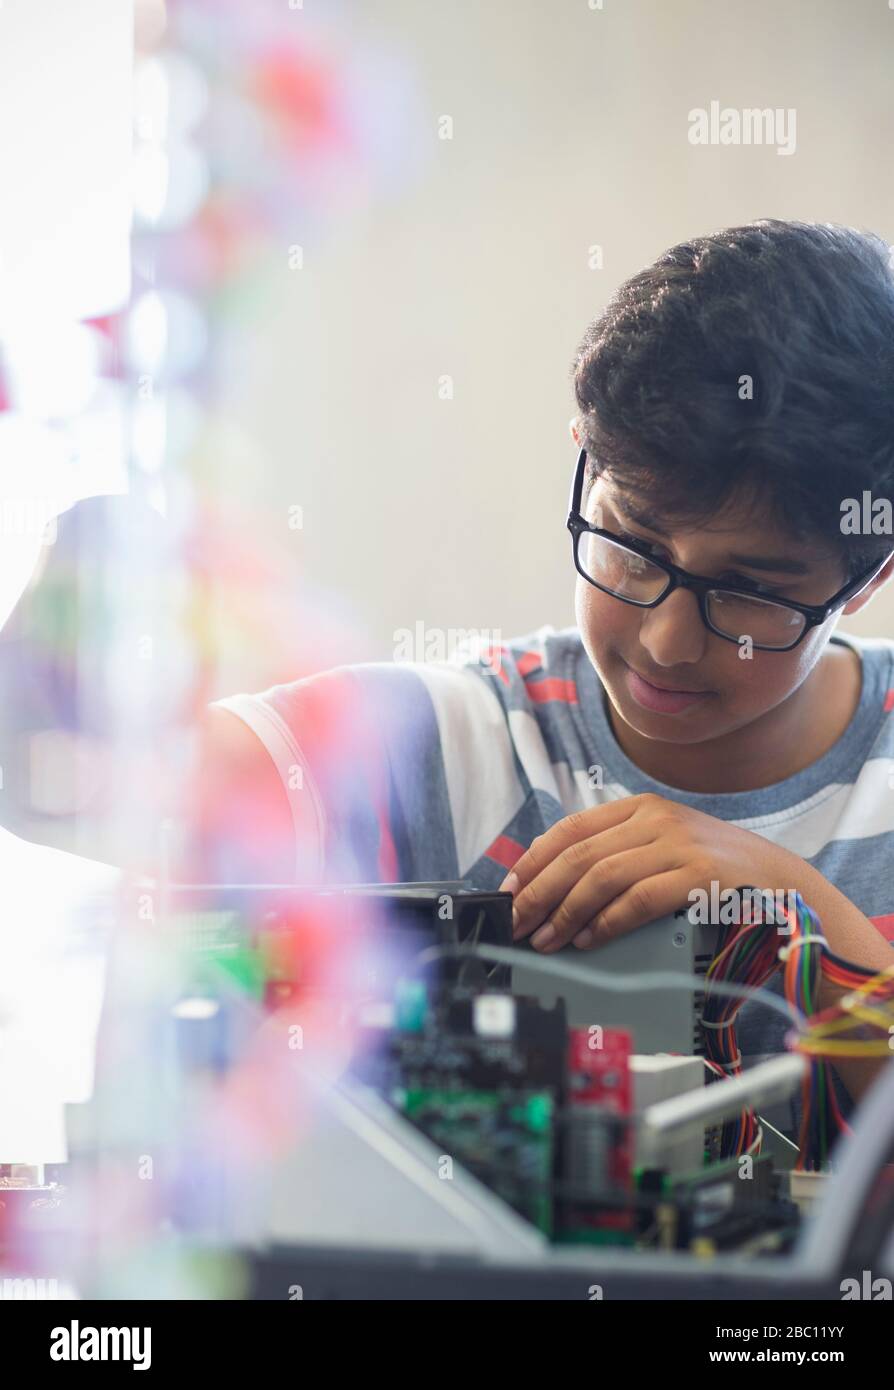 Focused boy student assembling computer in classroom Stock Photo